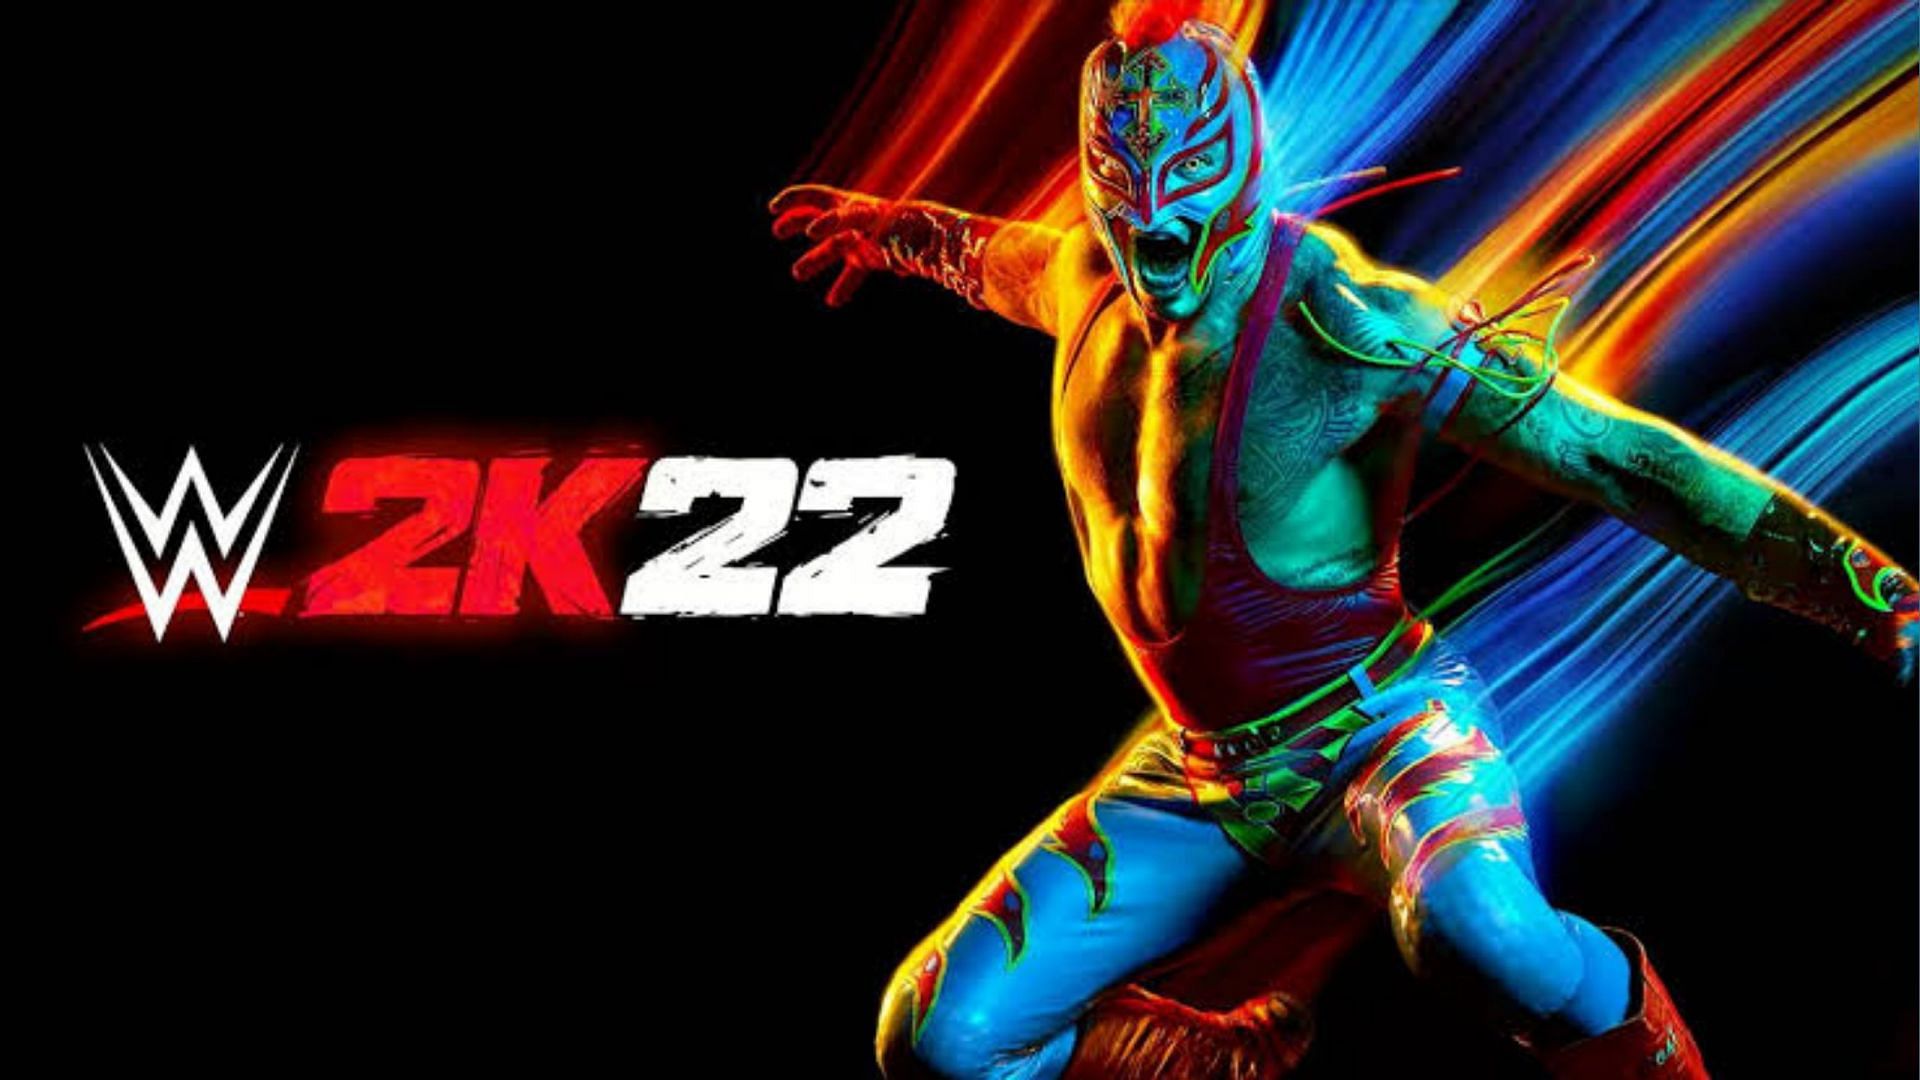 WWE 2K22 has received a brand-new update.